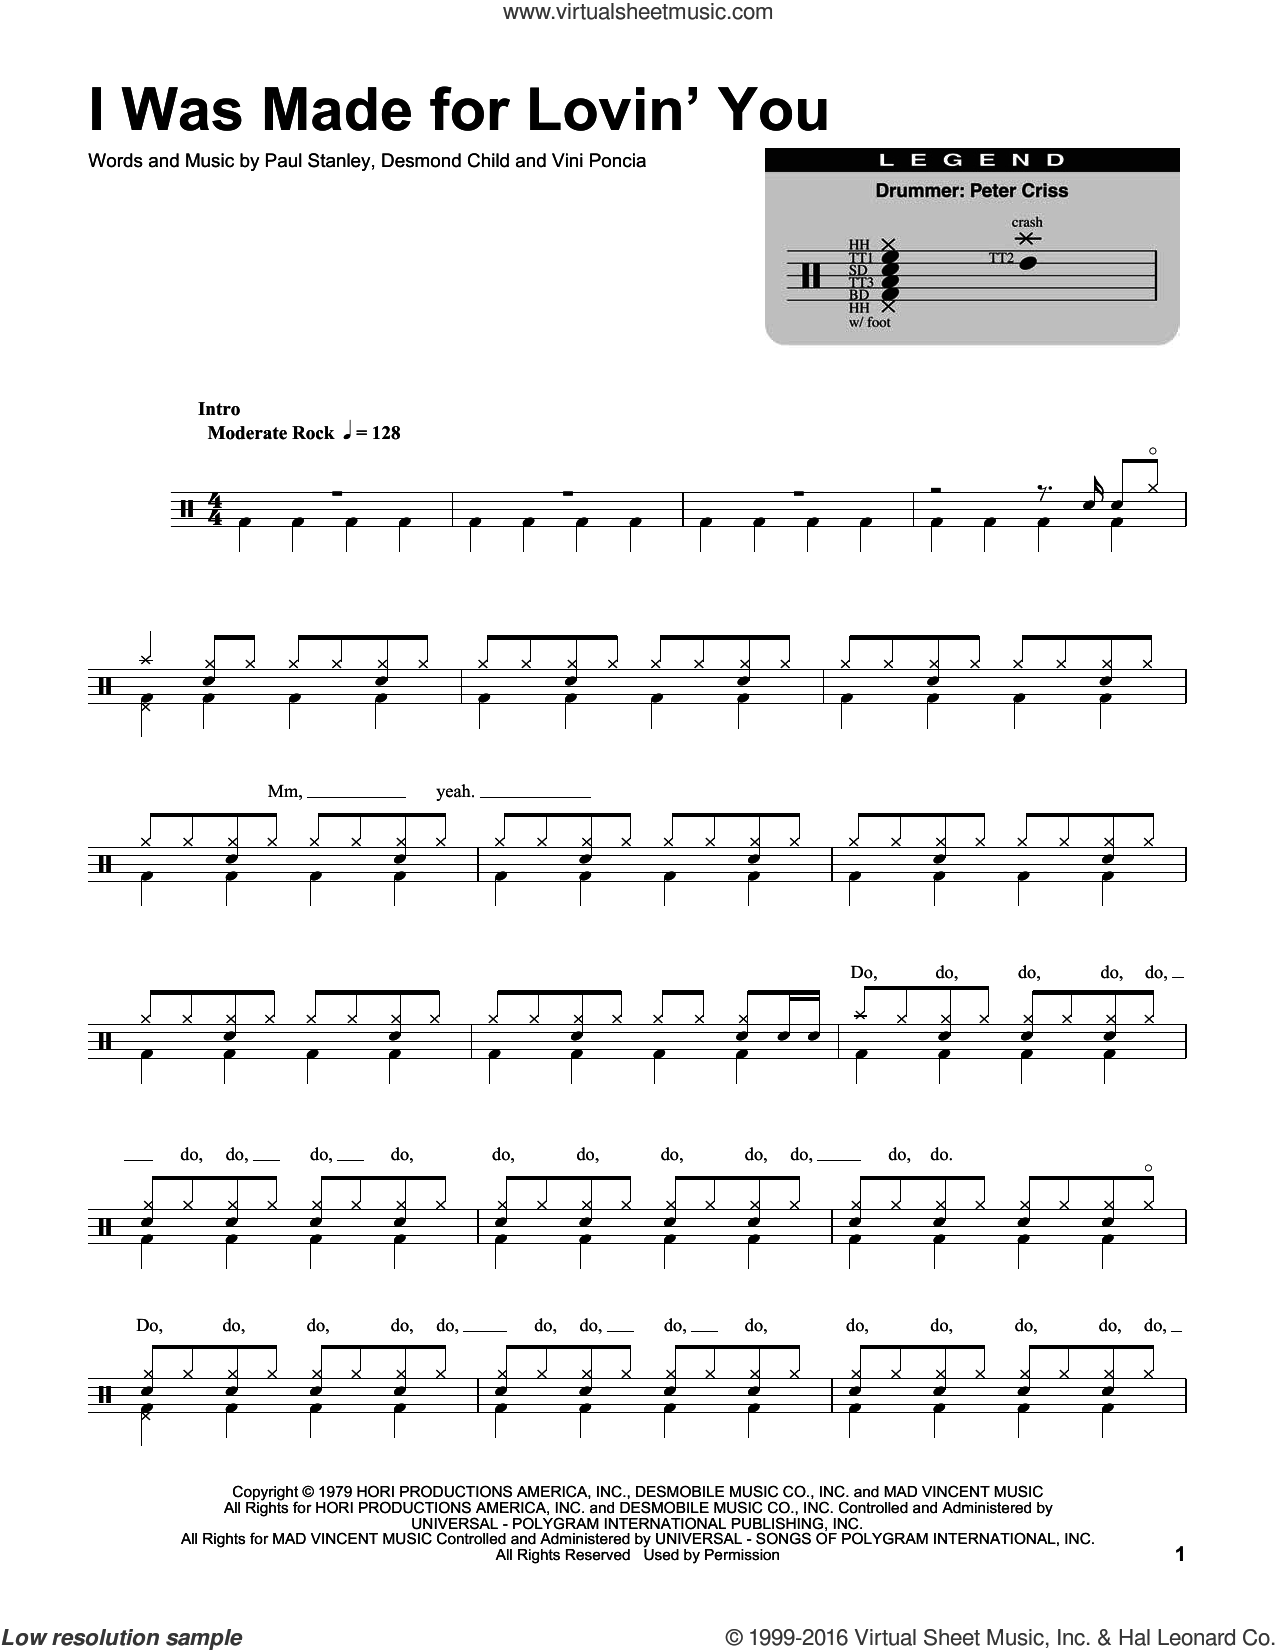 KISS - I Was Made For Lovin' You sheet music for drums